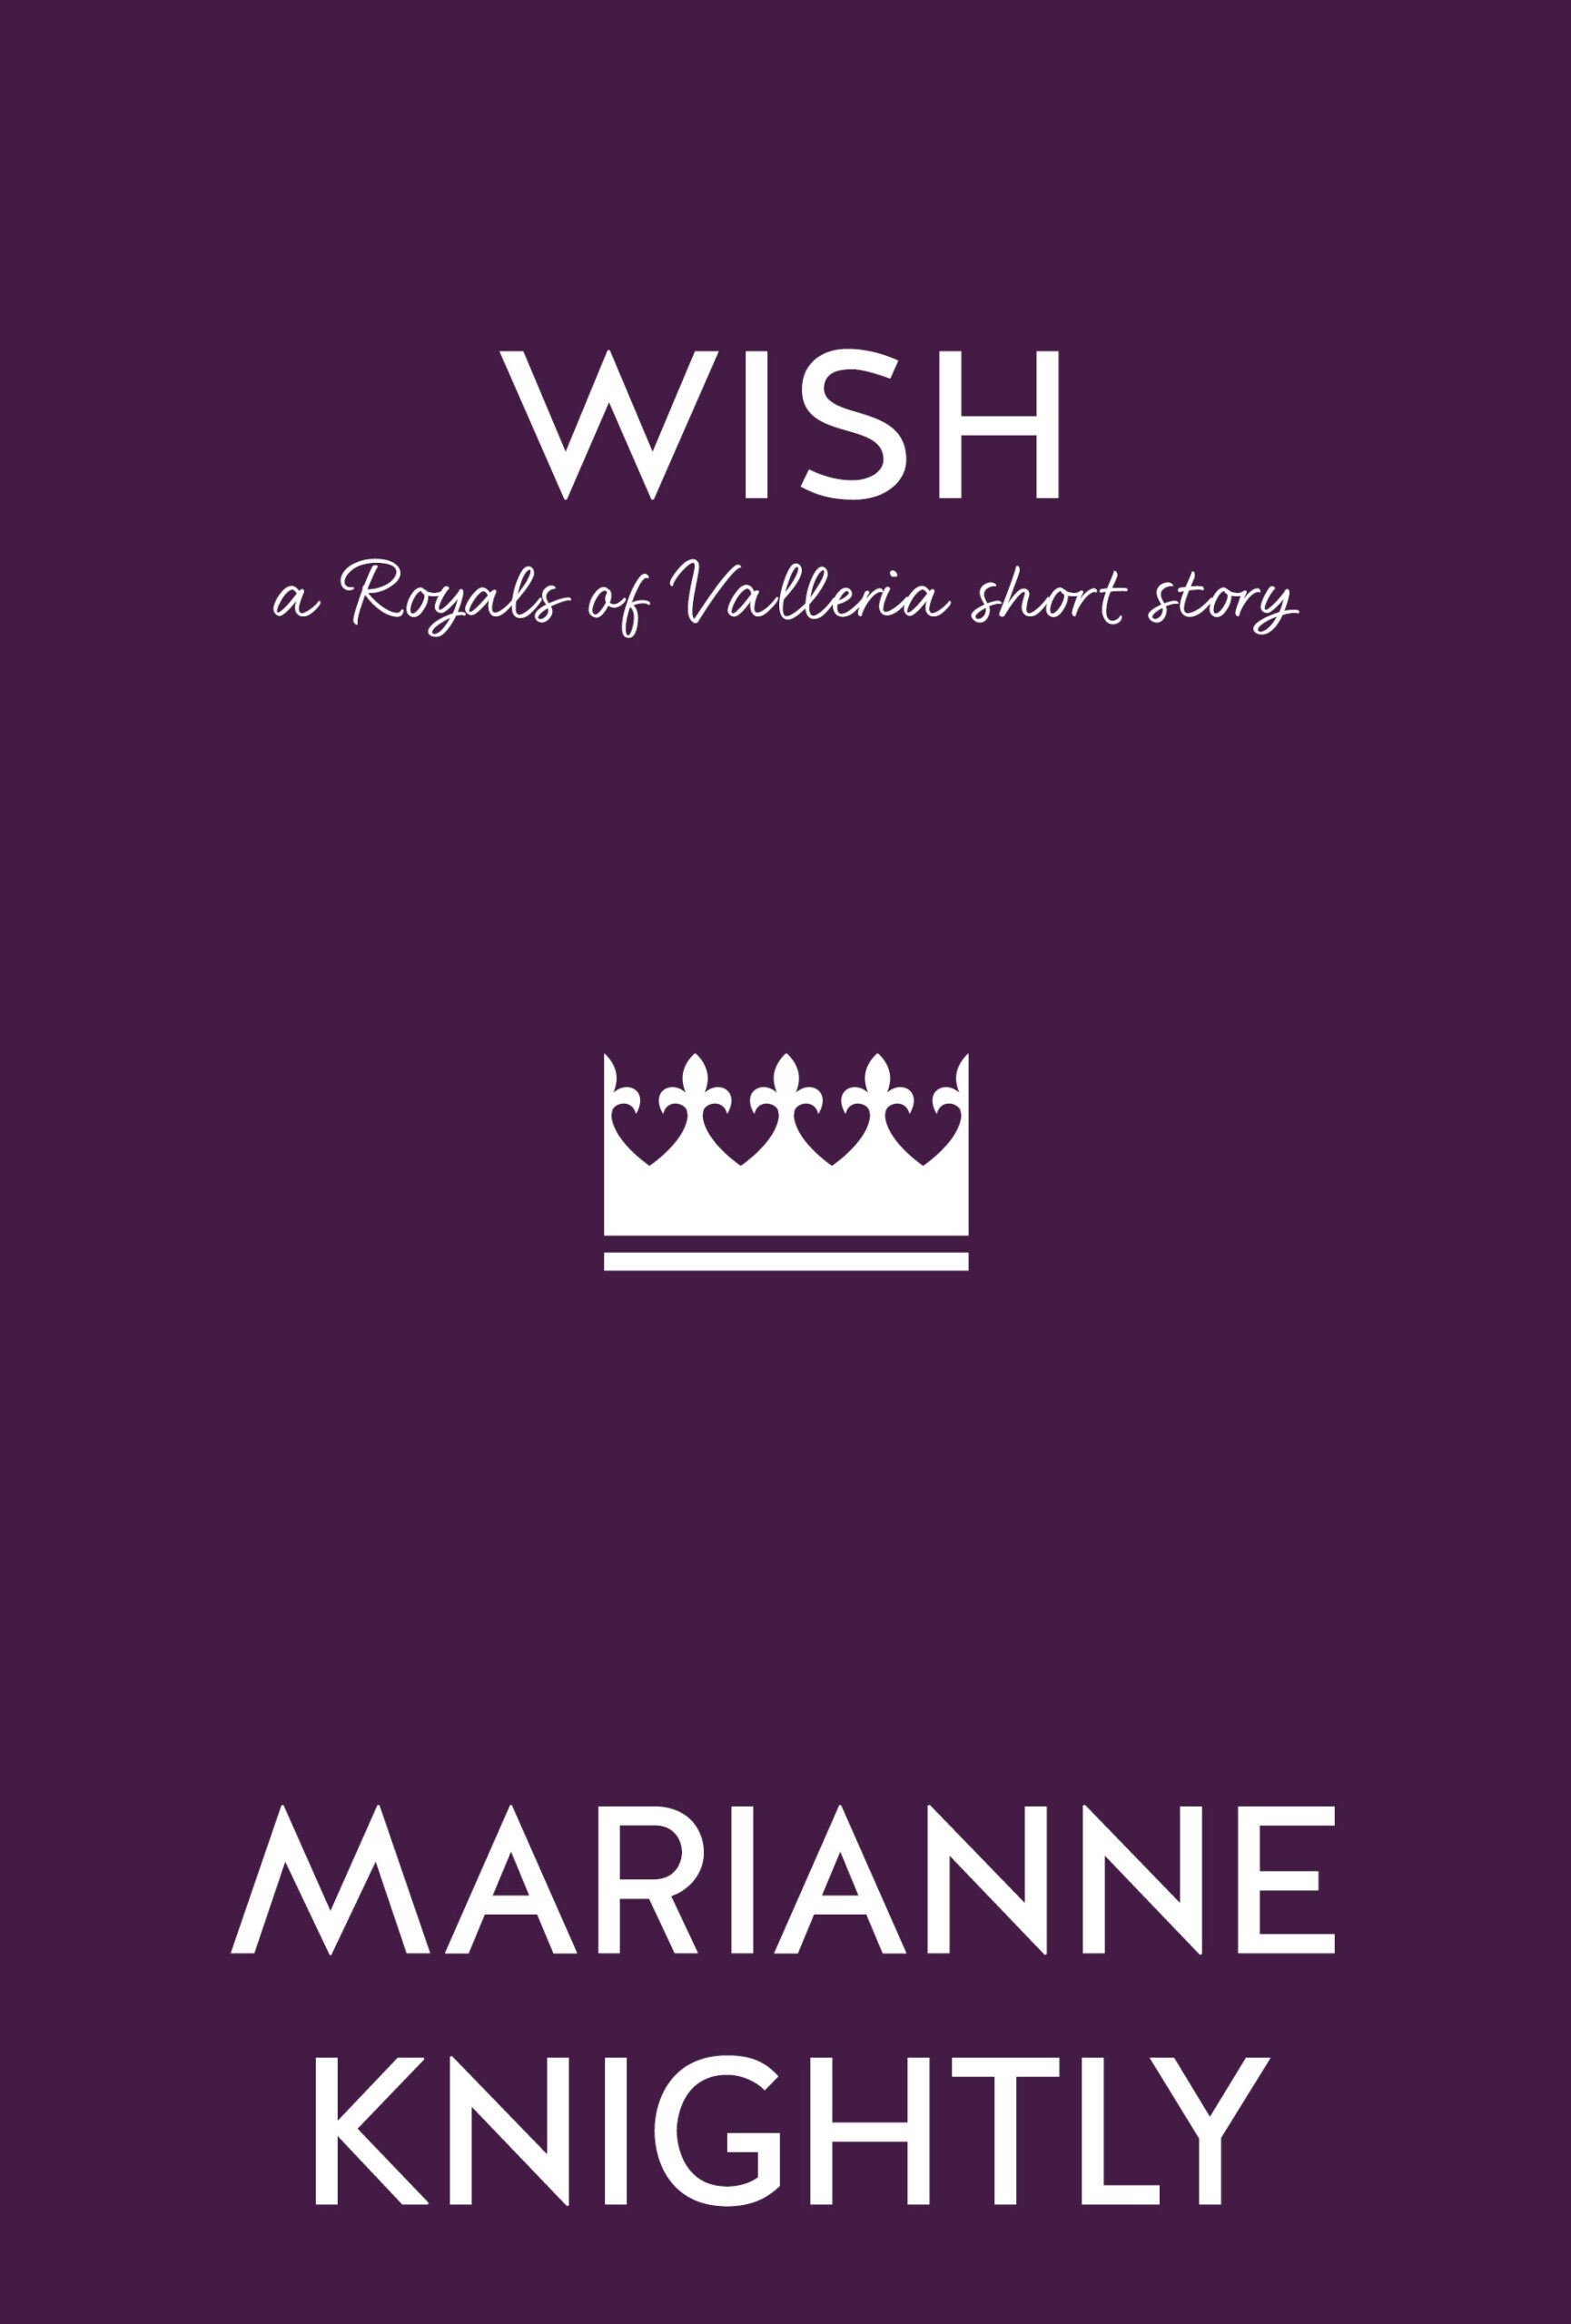 Wish - A Royals Short Story by Marianne Knightly